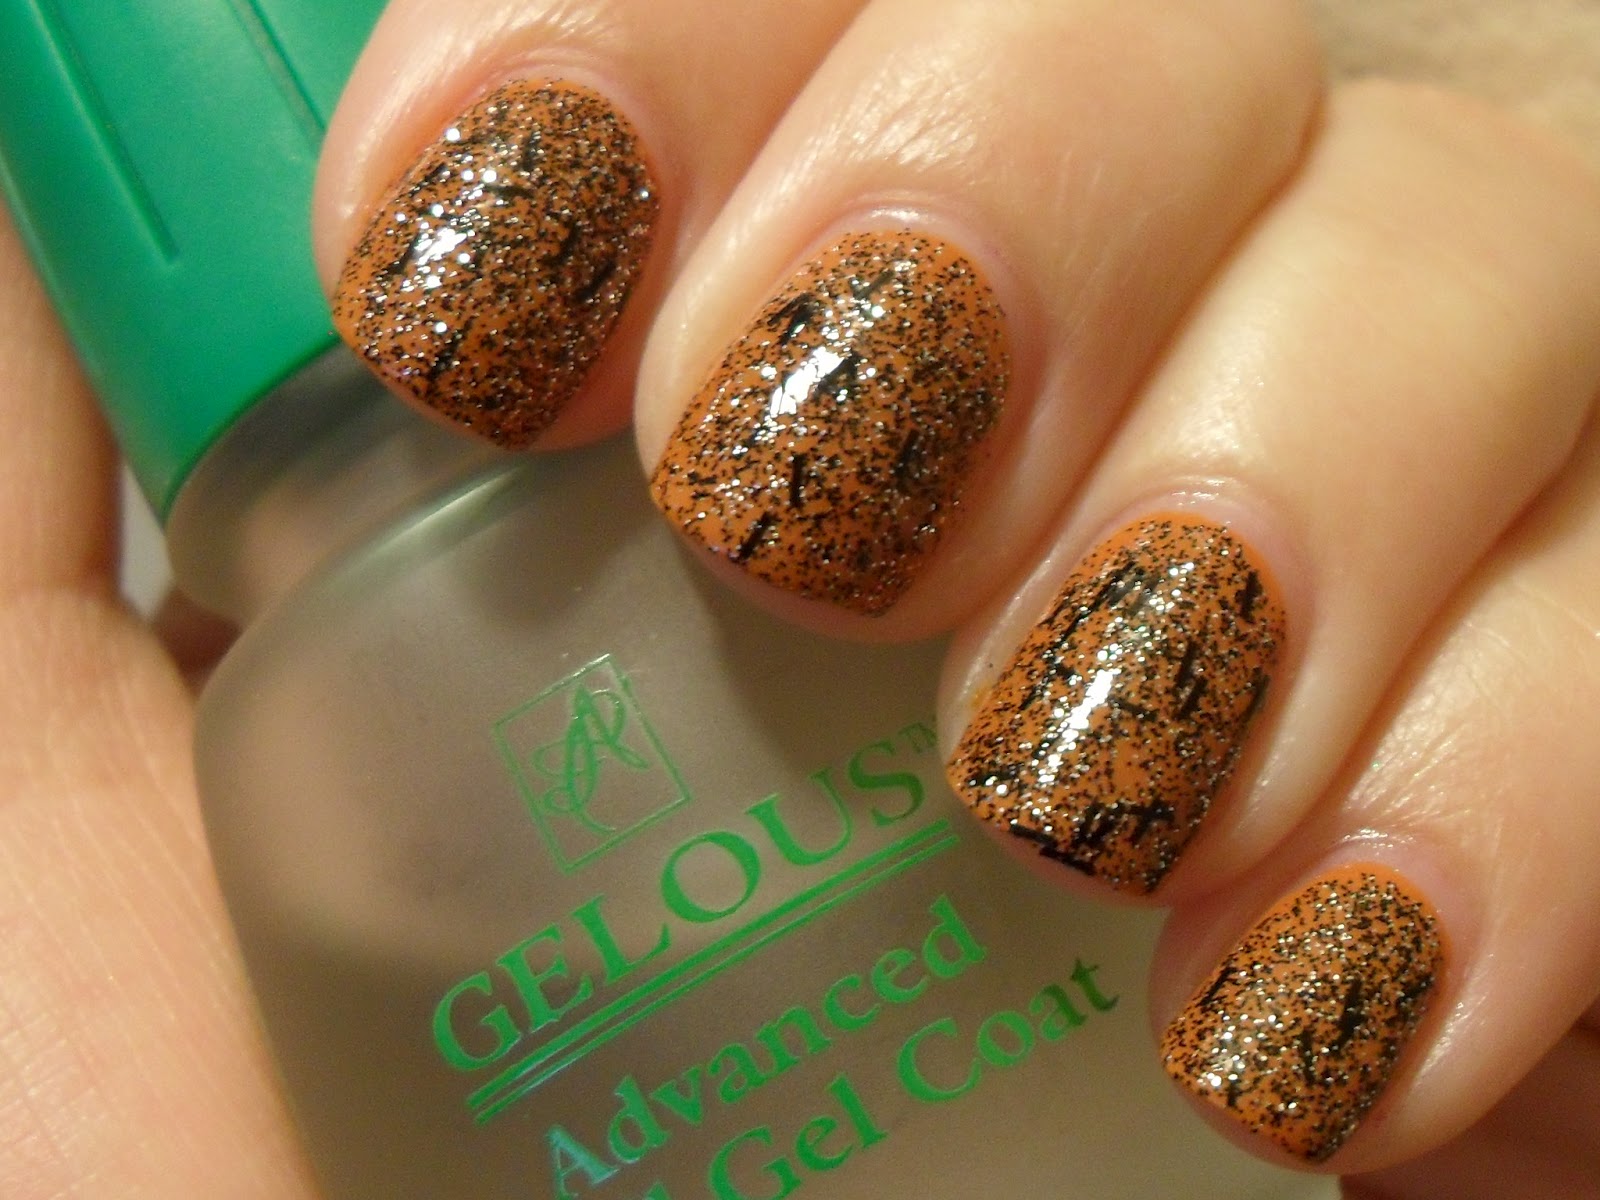 Polished Claws Up!: HALLOWEEN MONTH! Retro Sunday Squared with The ...